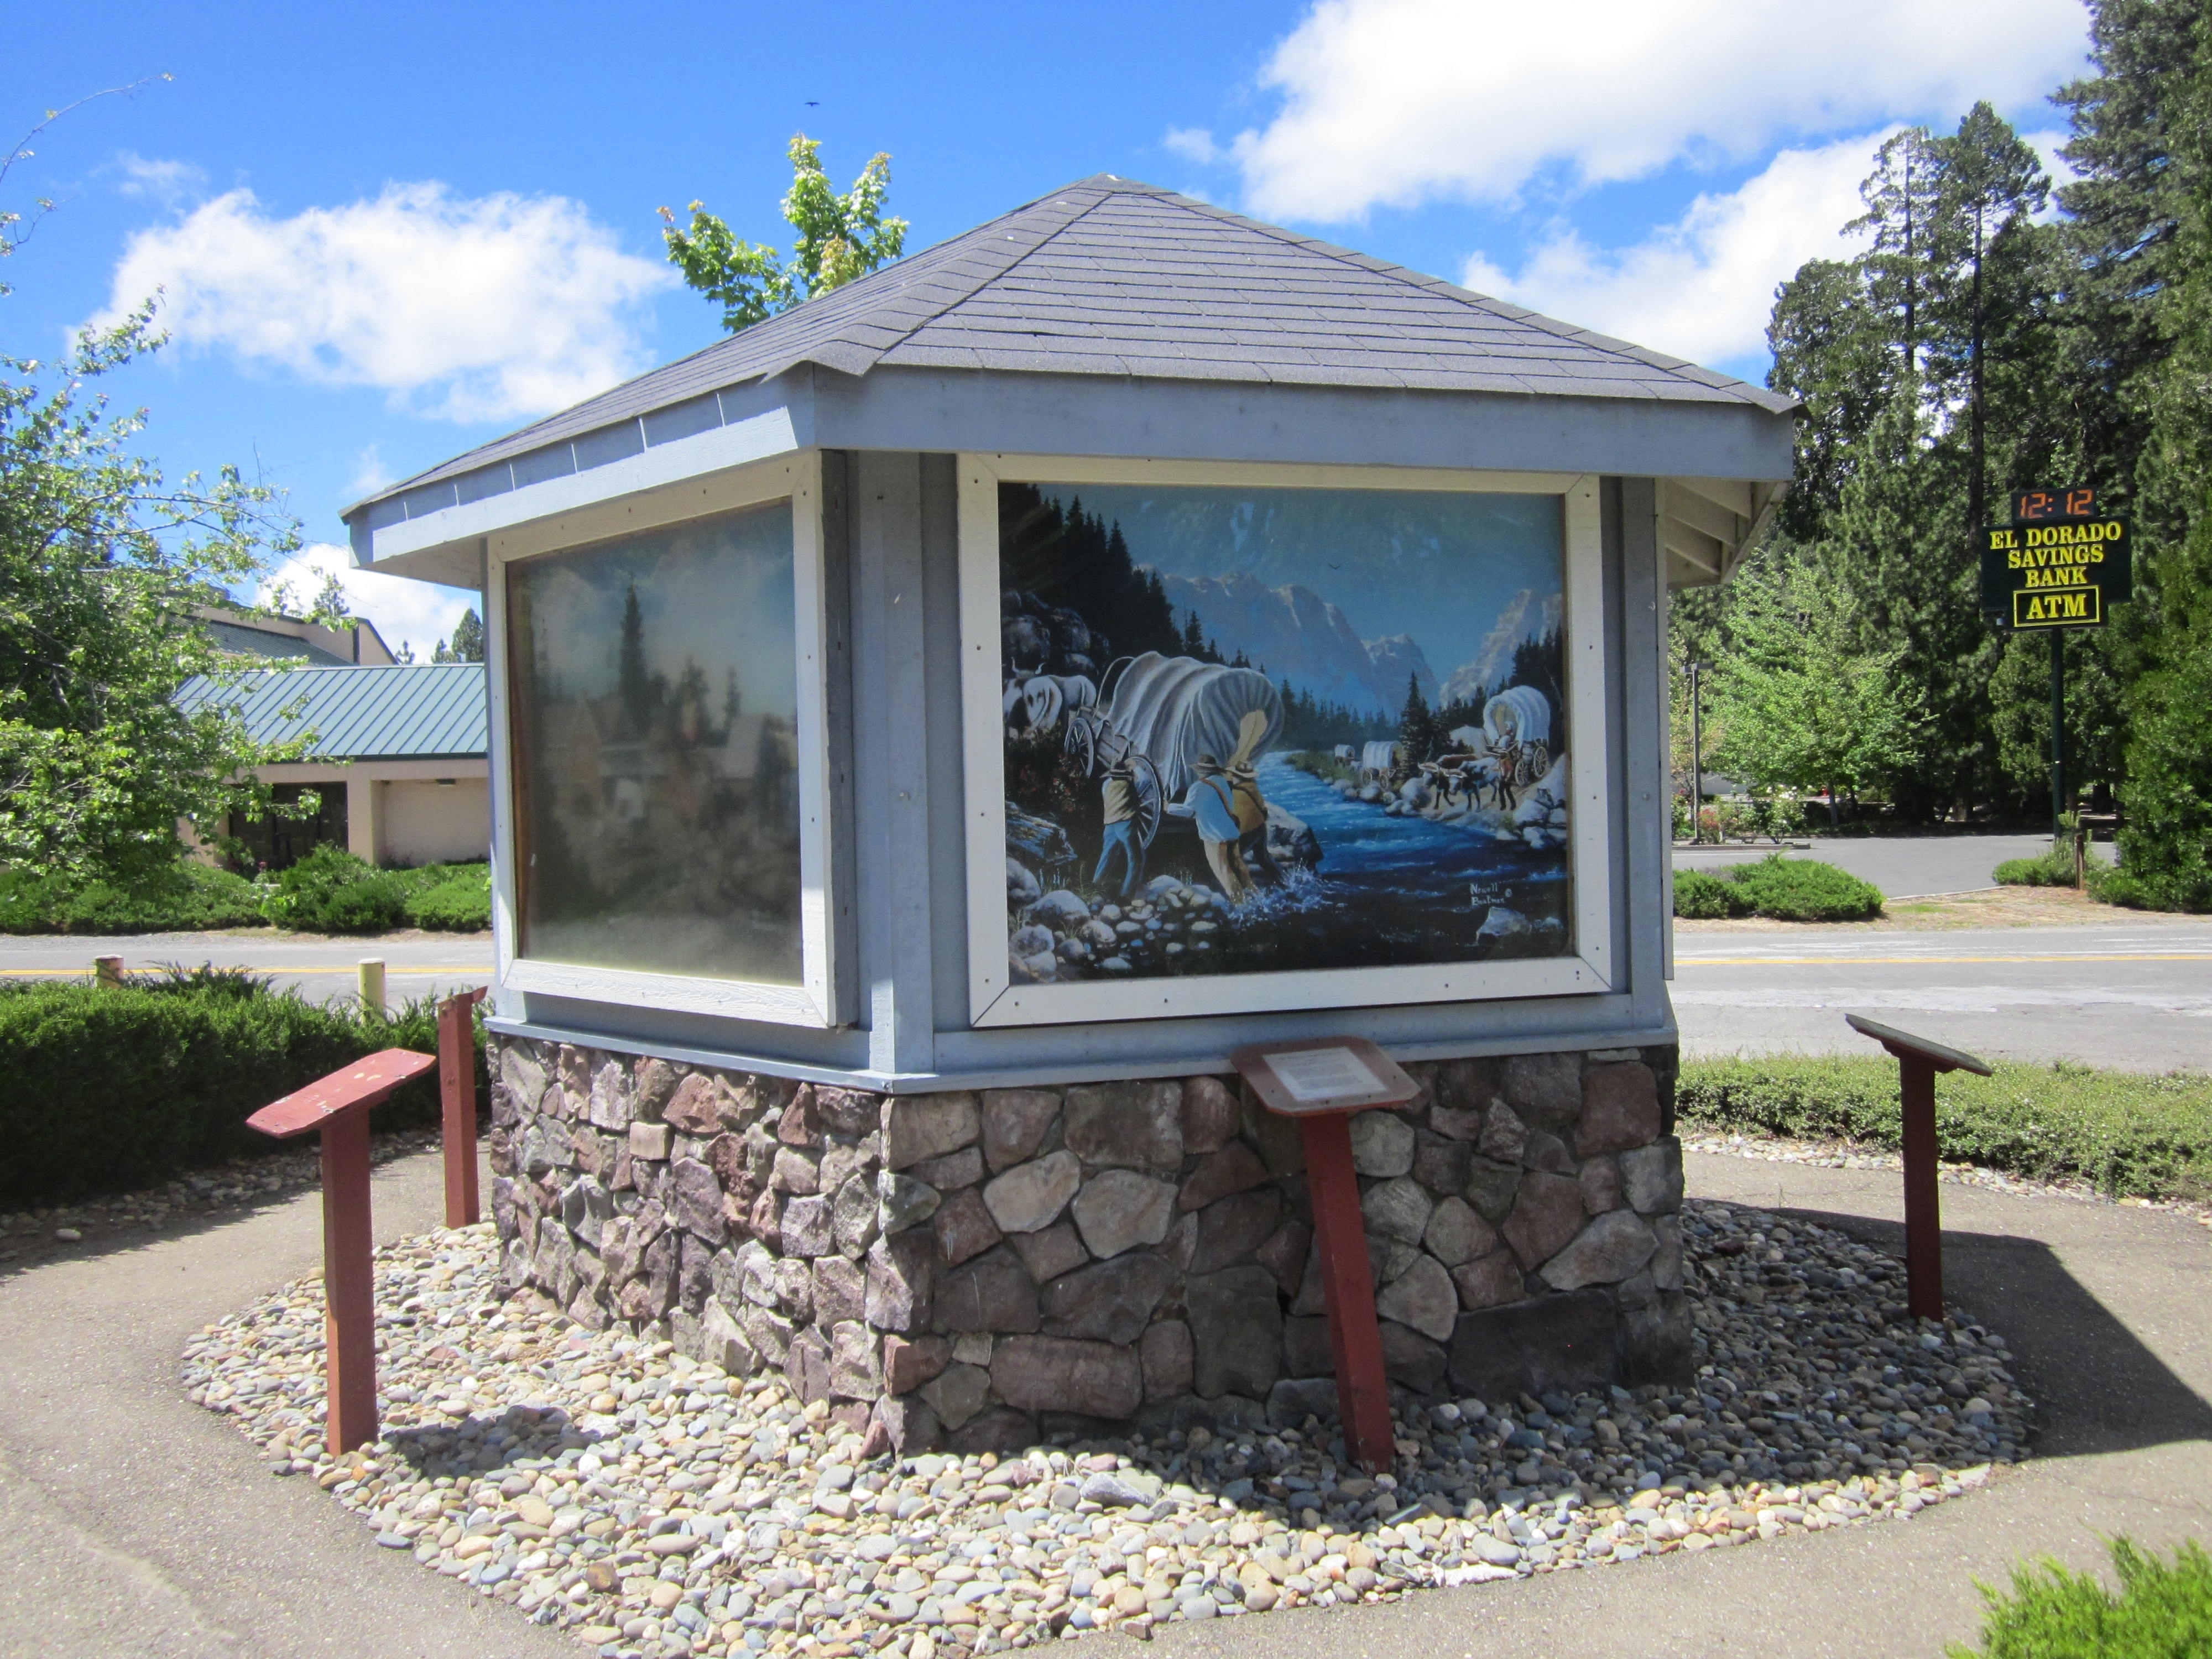 The Mormon Emigrant Trail Marker and Painting Depicting the Event